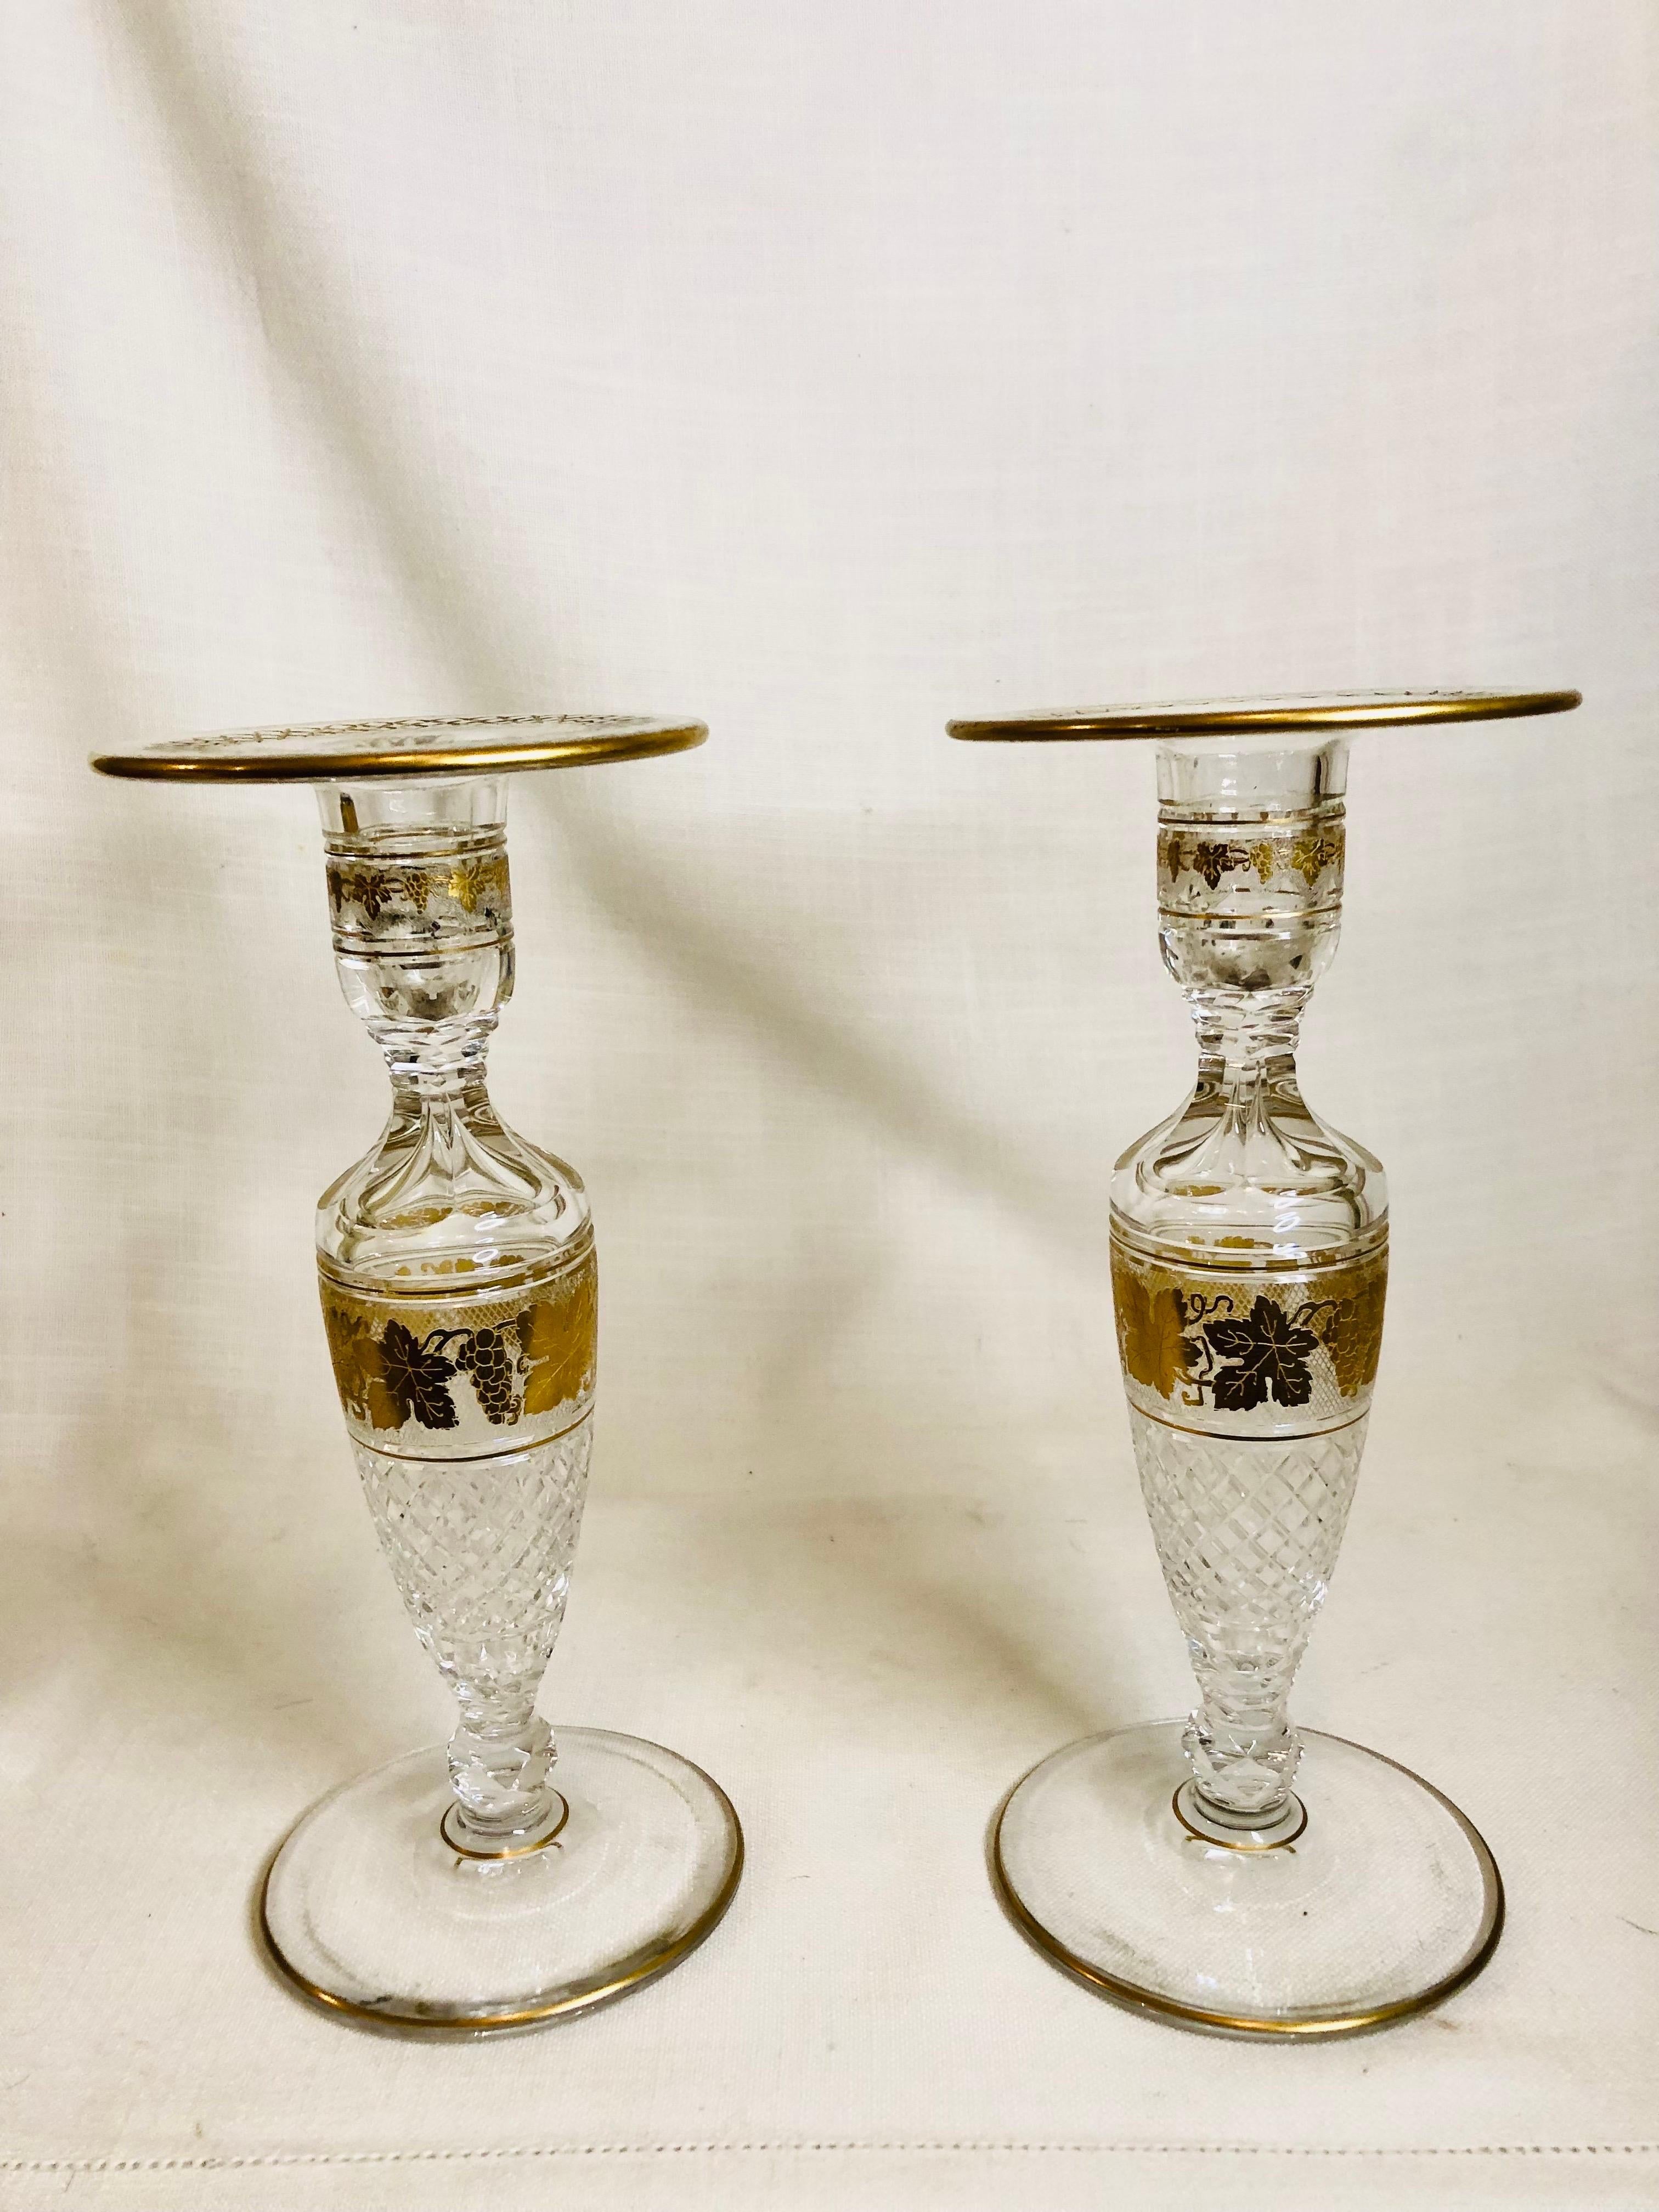 I am offering you this beautiful cut crystal pair of Val Saint Lambert candlesticks with decorations of gilt grapes and grape leaves from Belgium. The bases of the candlesticks are beautifully cut as you can see in the pictures. These stunning Val